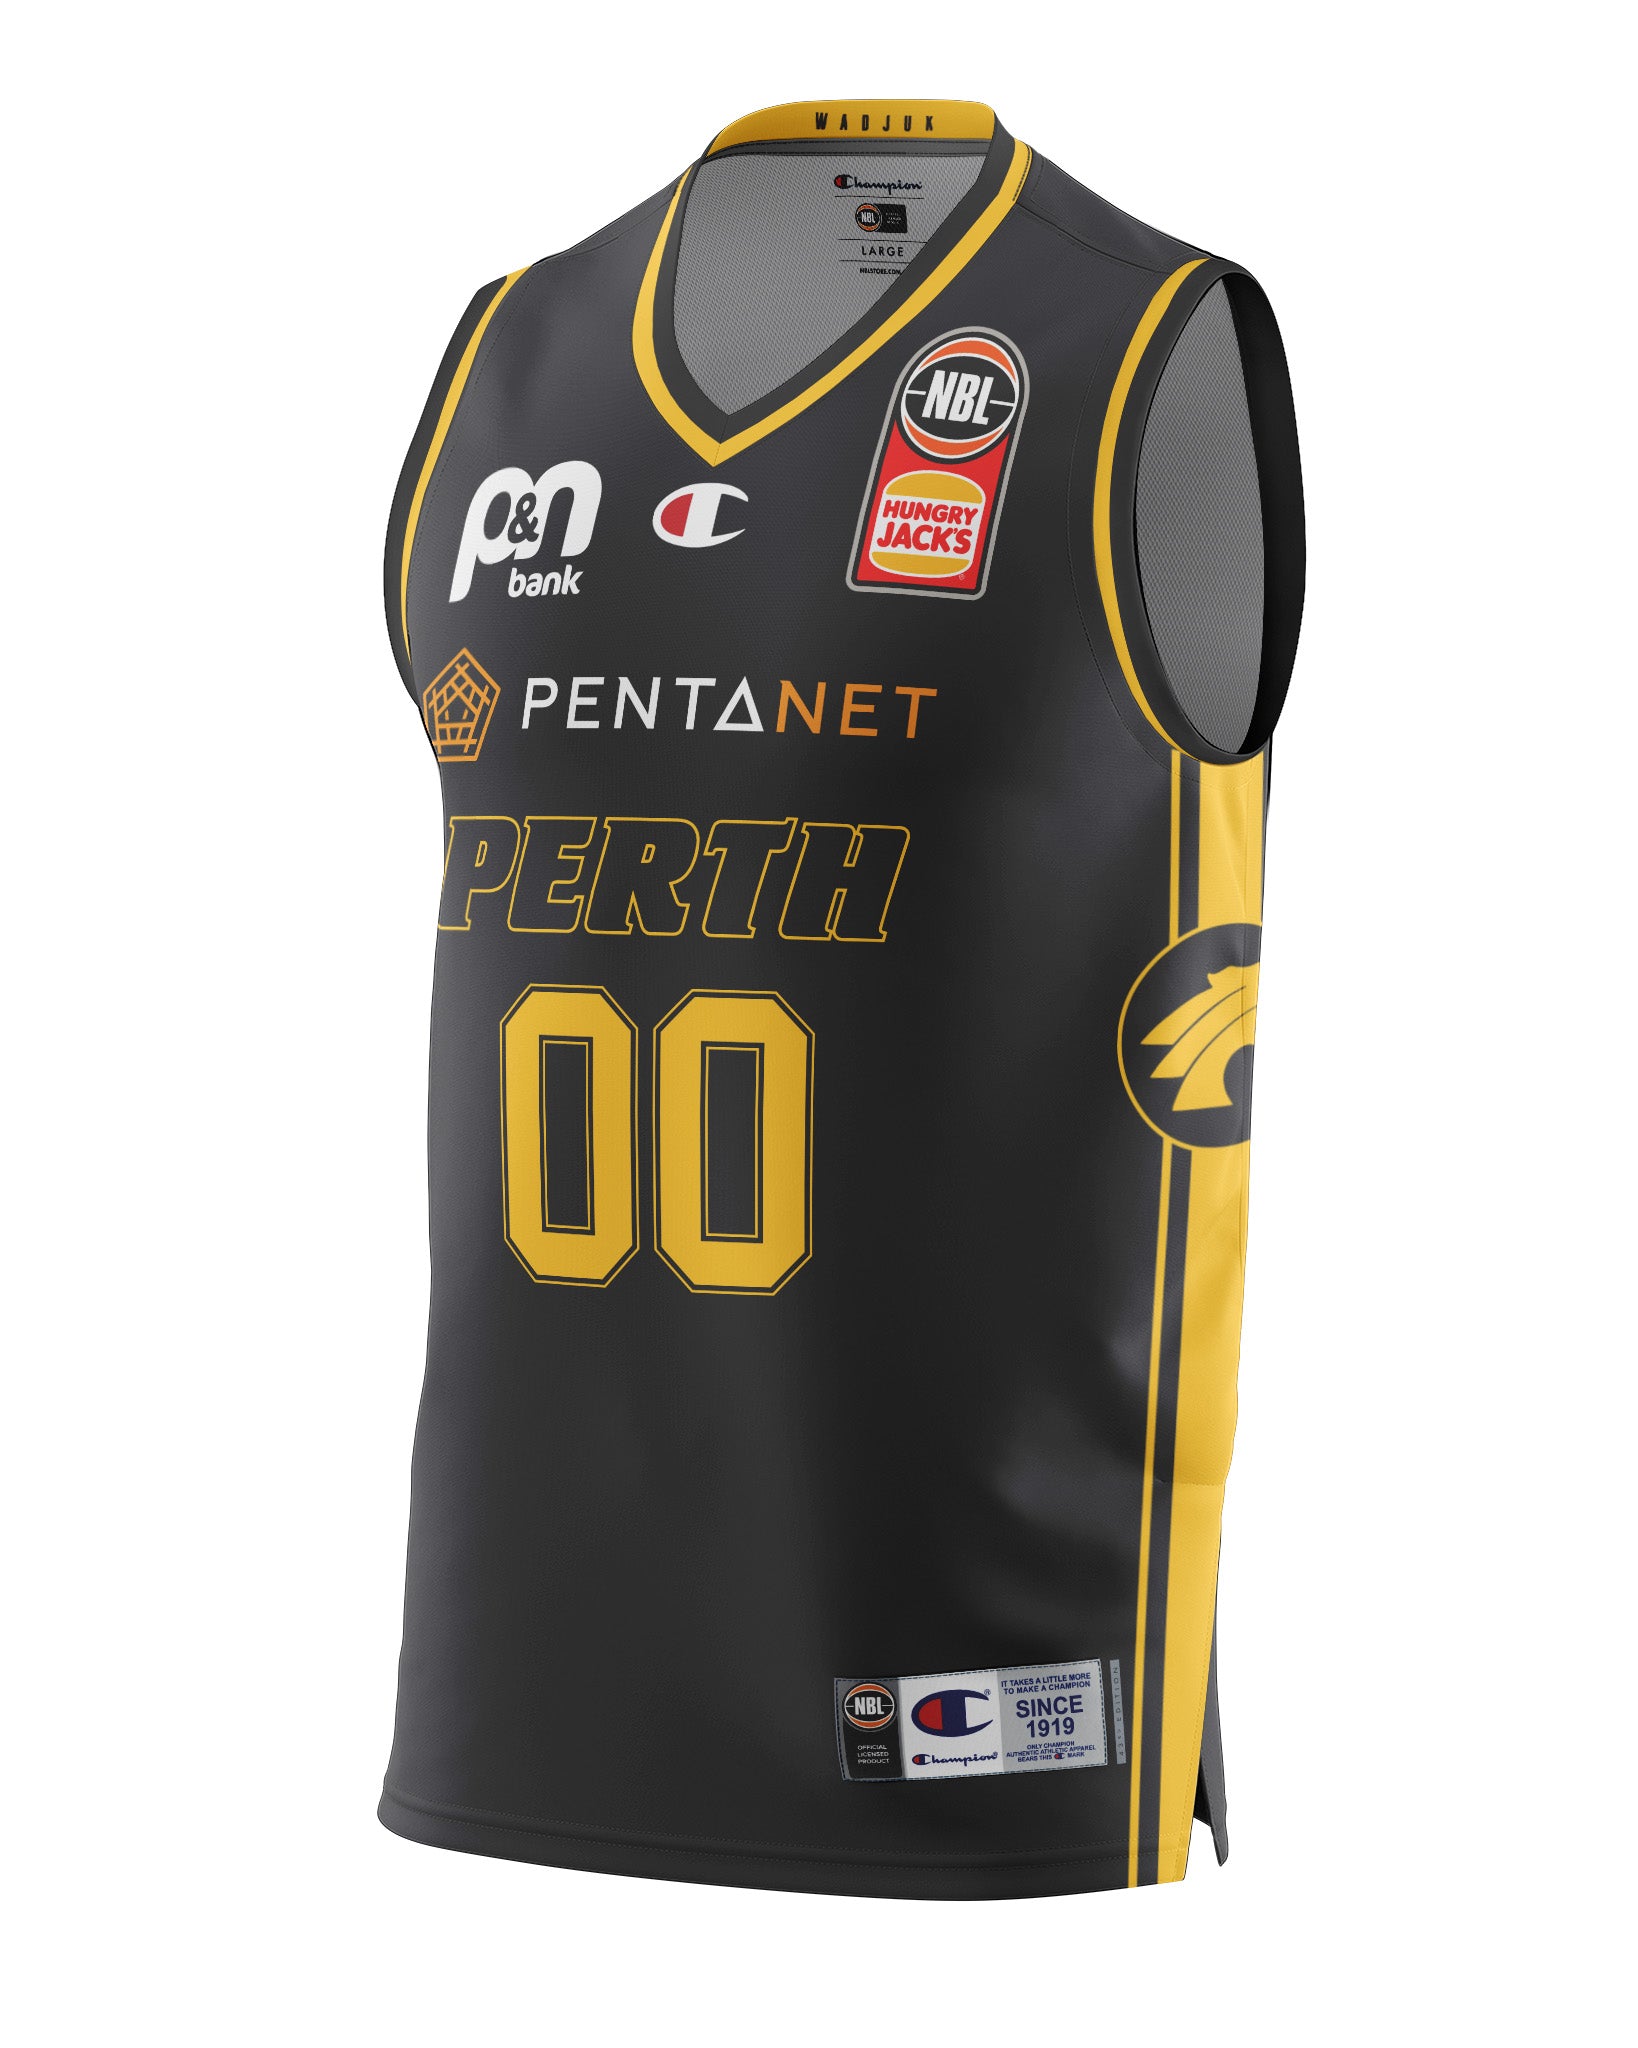 NBL News on X: All 10 Indigenous Round jerseys have been released